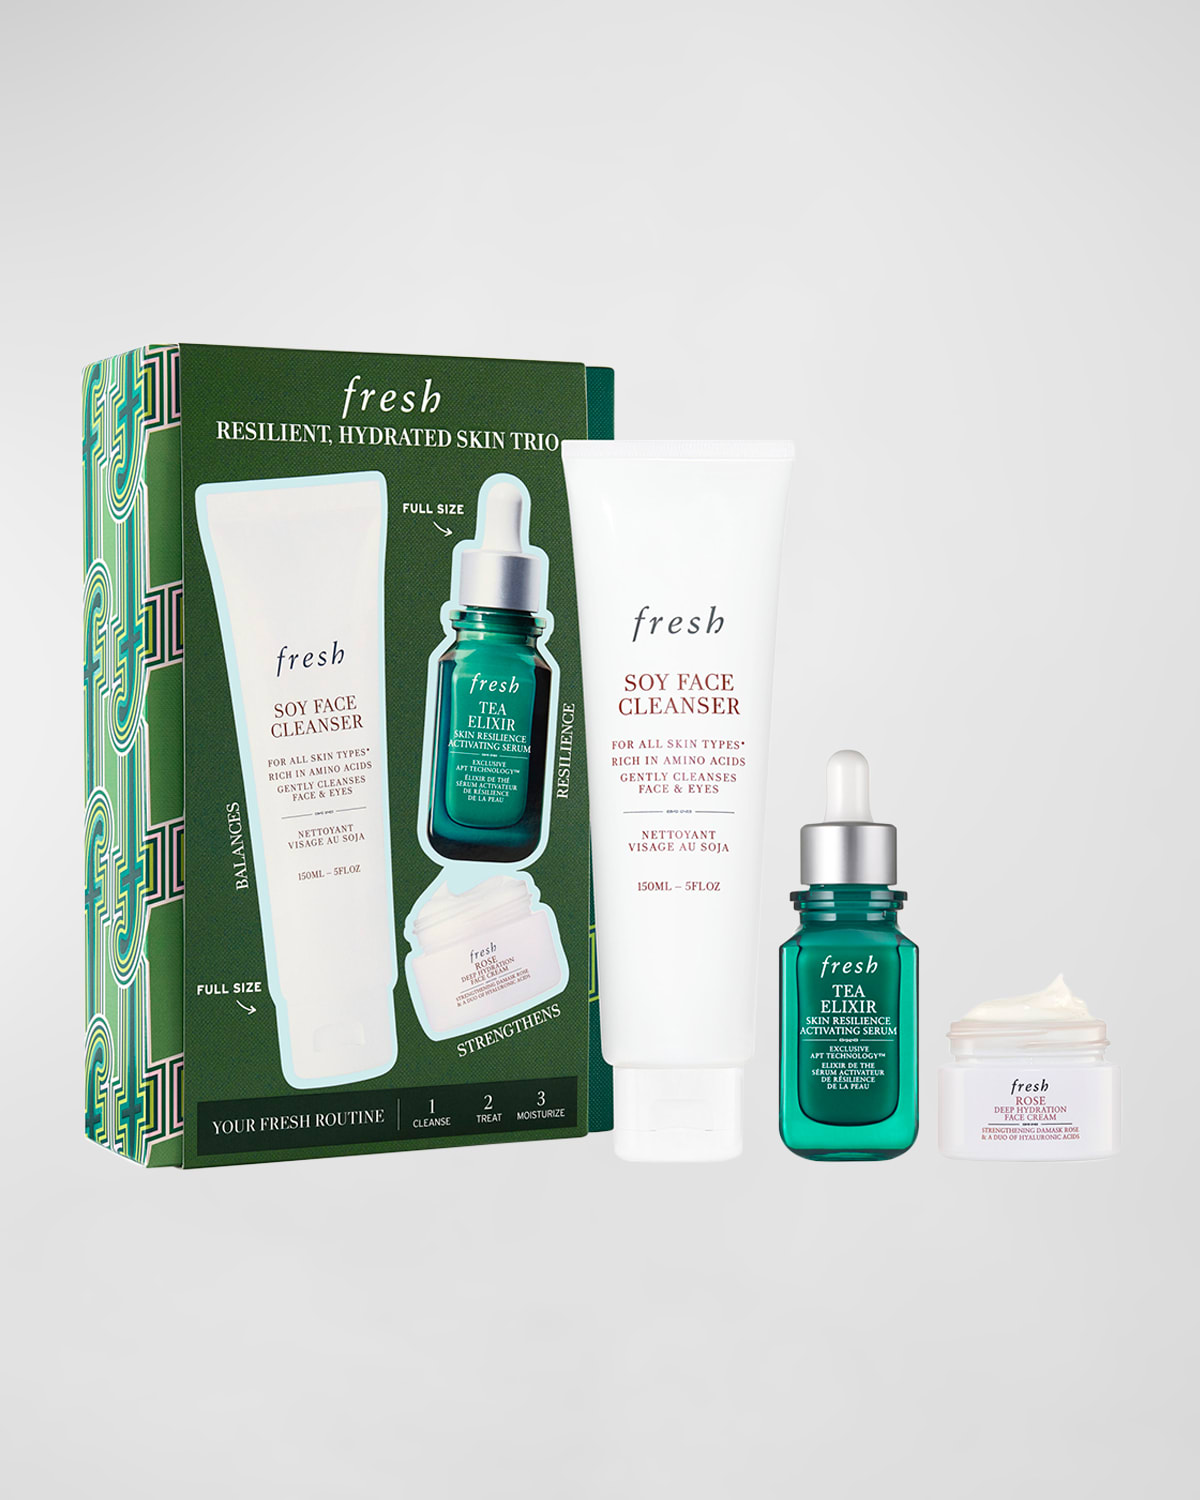 Limited Edition Hydration Boost Skincare Set ($137 Value)